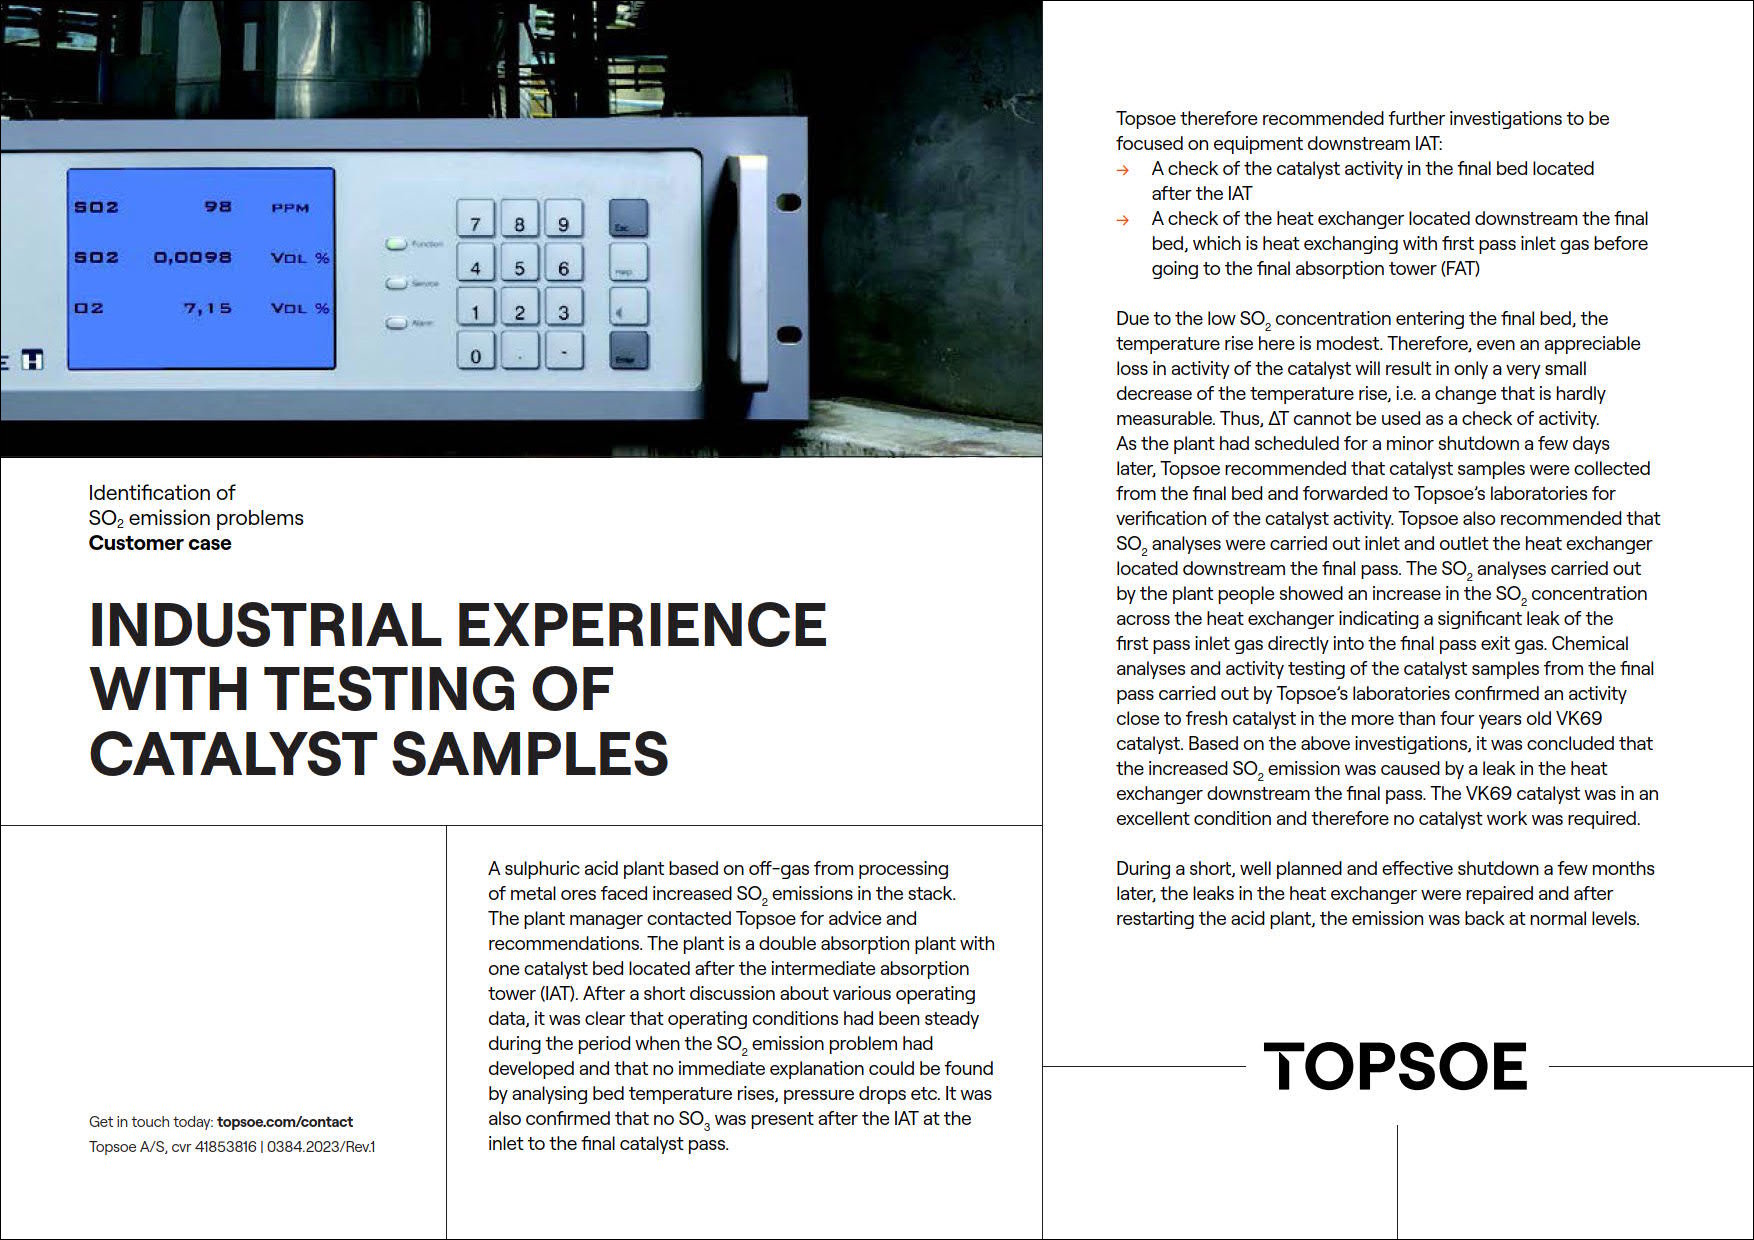 Industrial experience with testing of catalyst samples